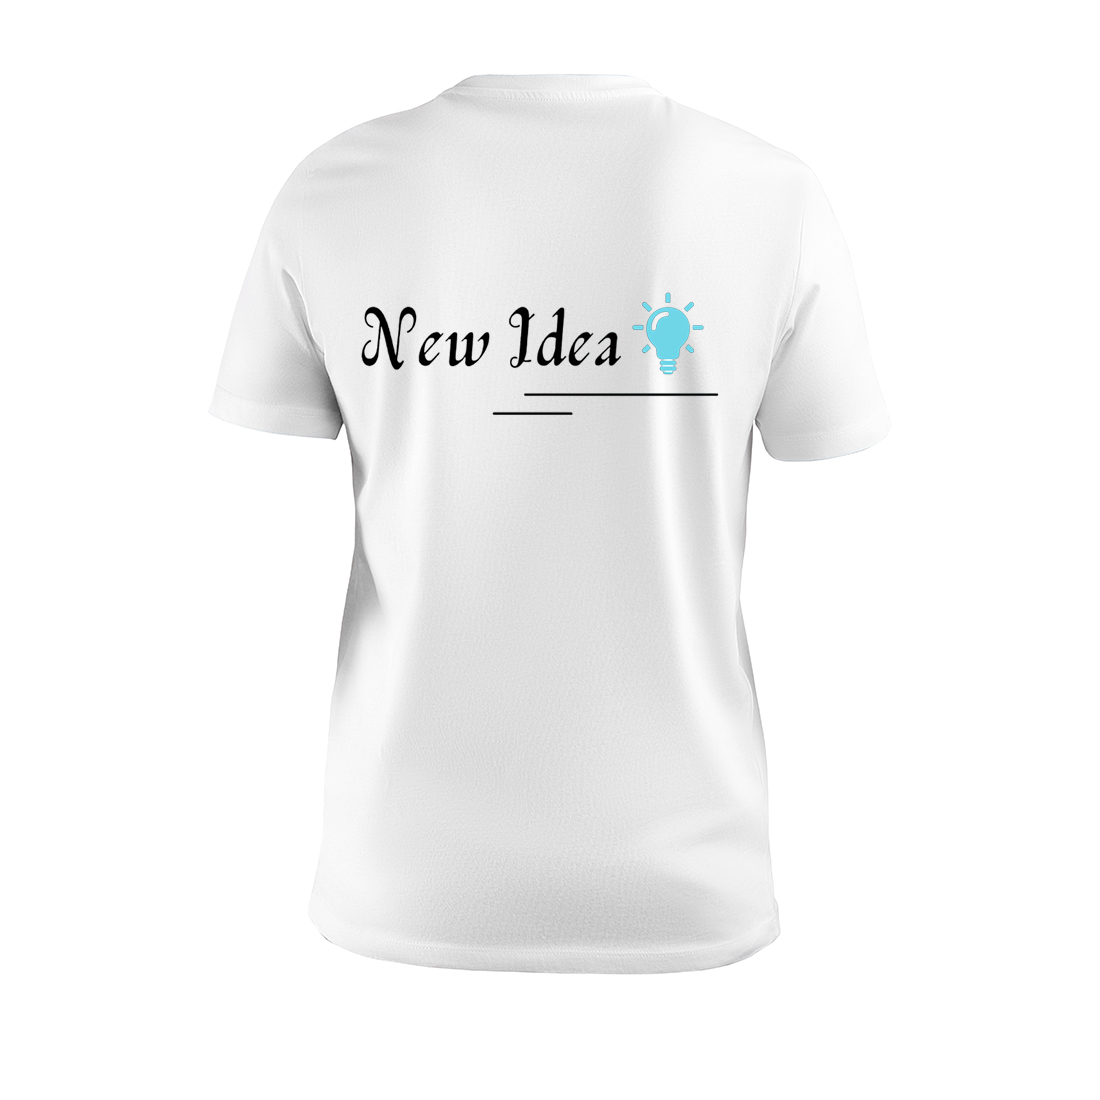 T-shirt design for printing - New Idea cover image.